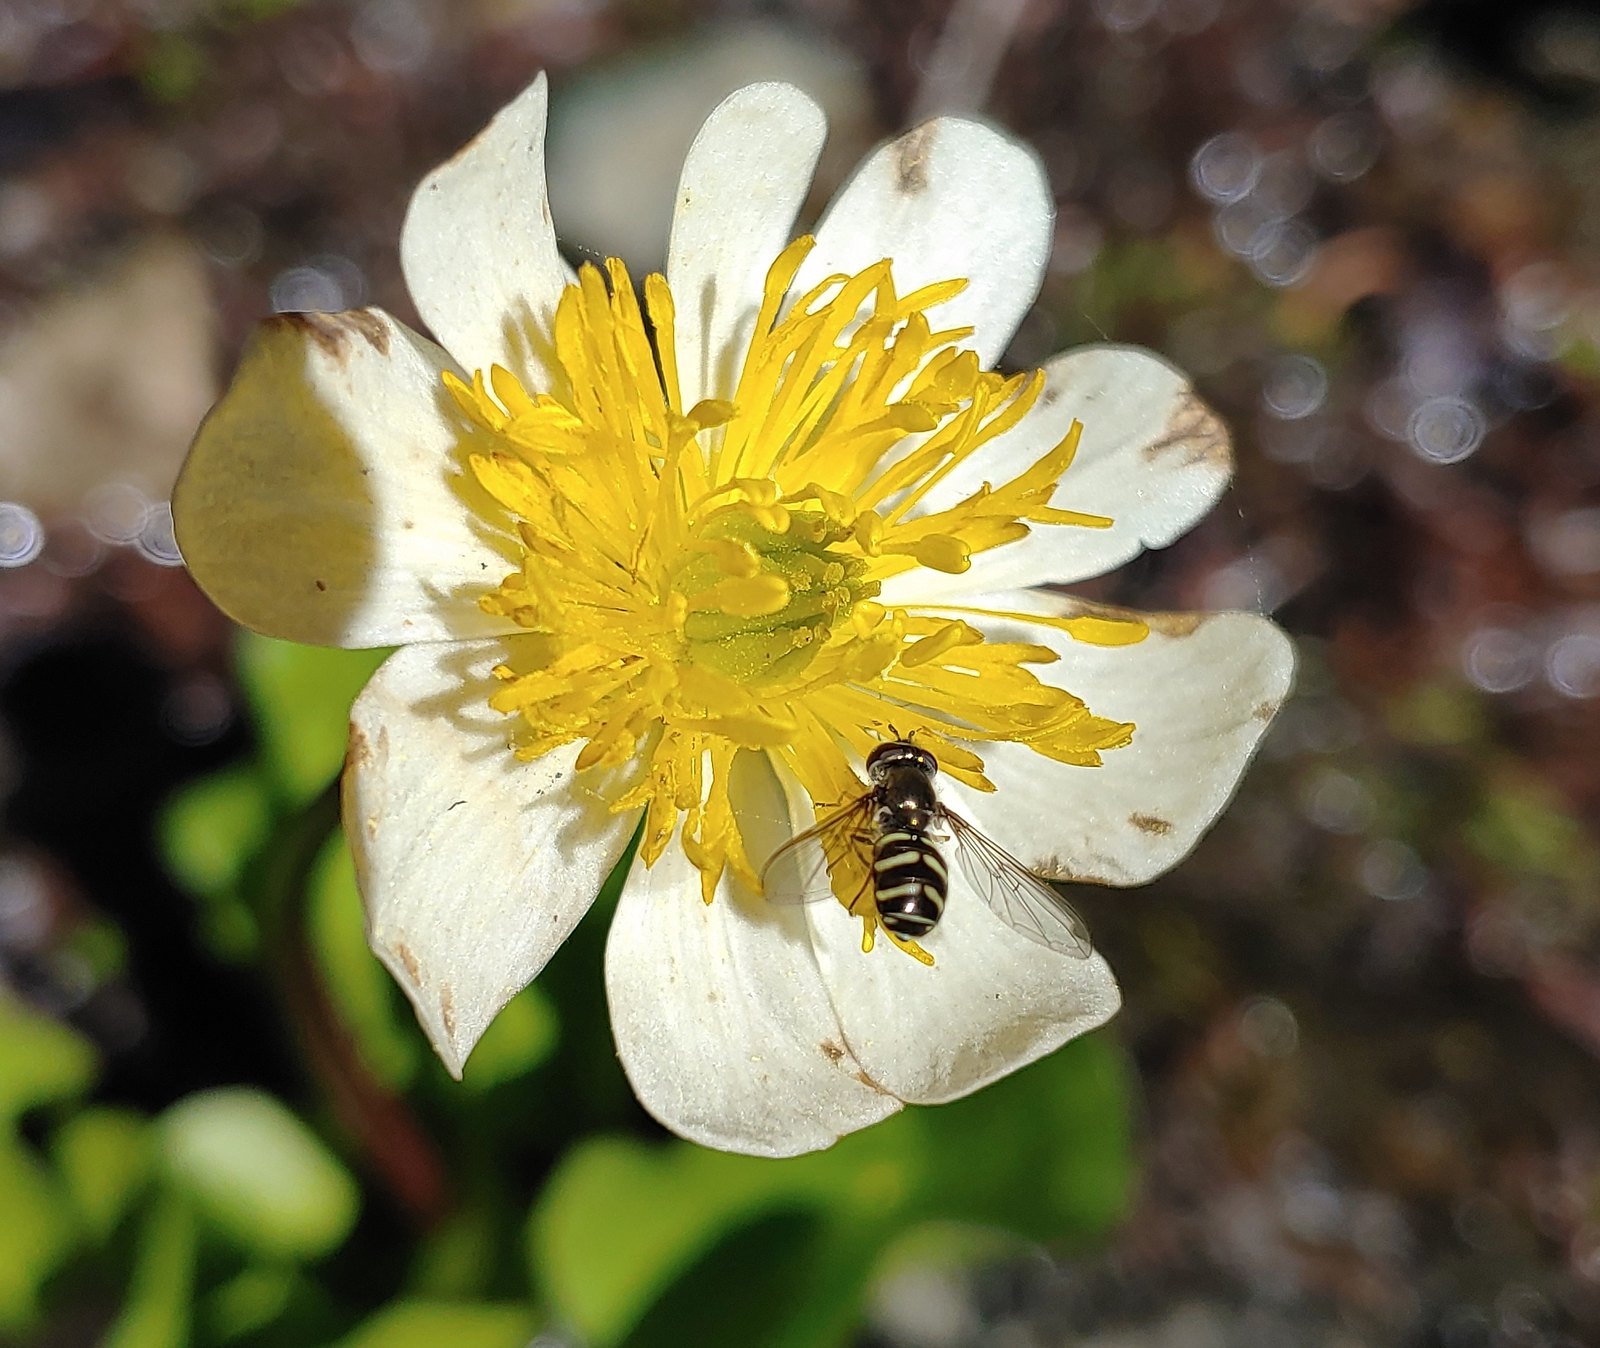 Marsh marigold with a visitor